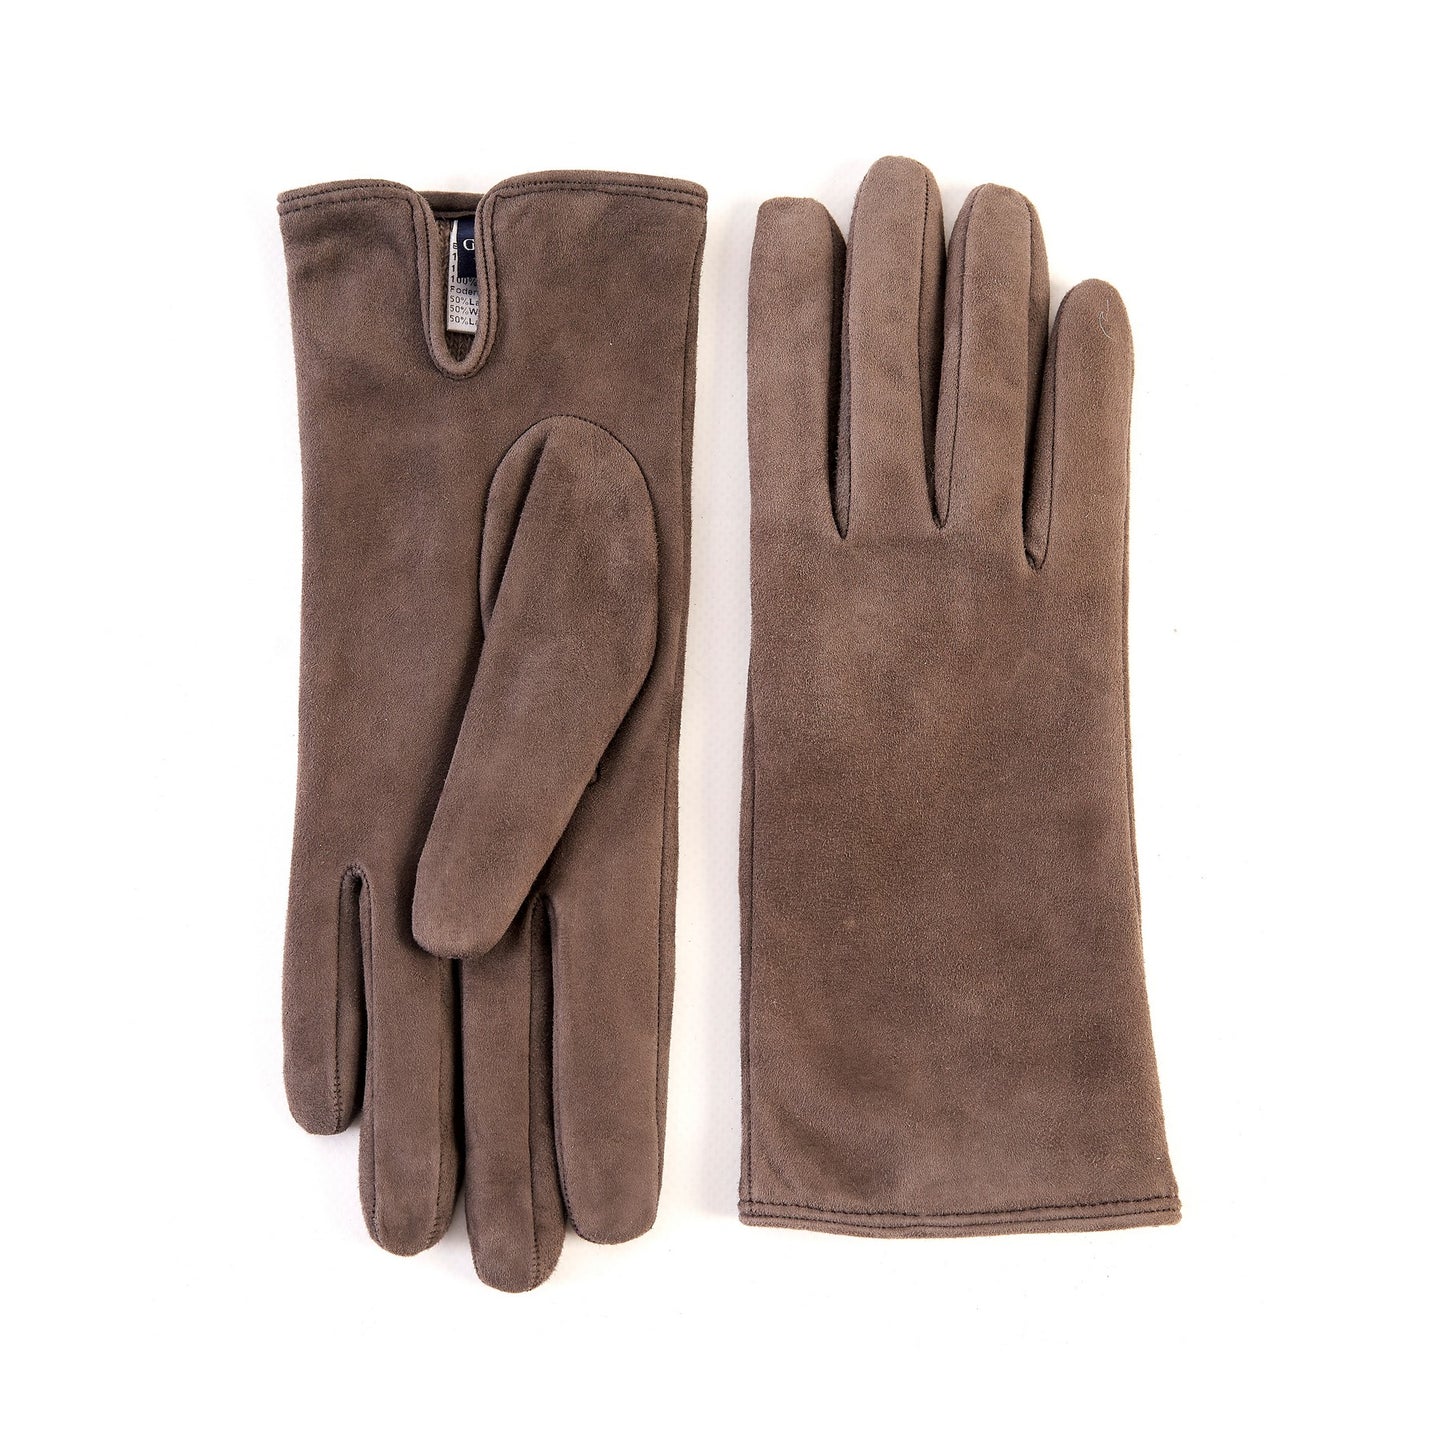 Women’s basic mud soft suede leather gloves with palm opening and mix cashmere lining